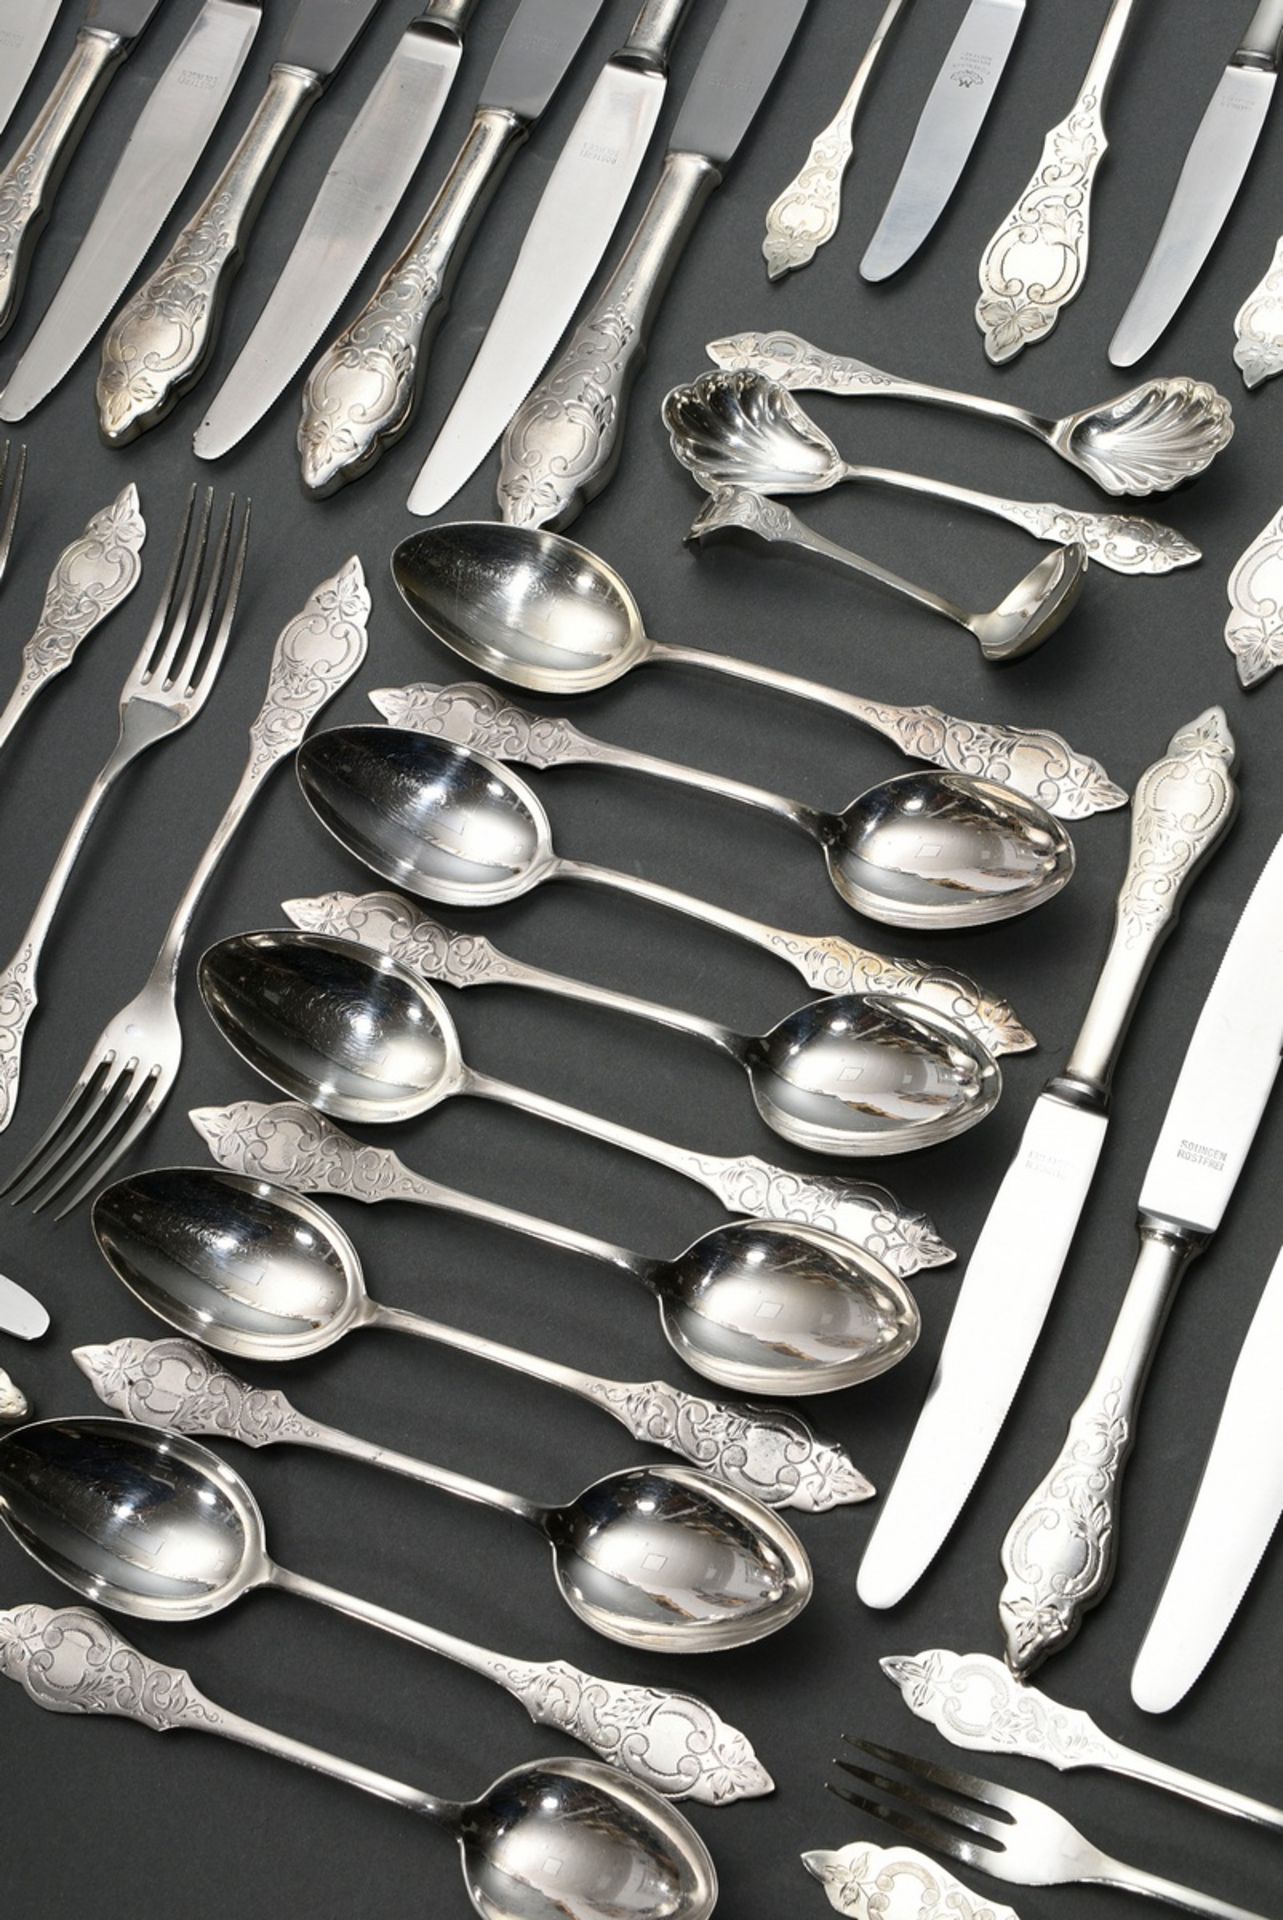 118 pieces Robbe & Berking cutlery ‘Ostfriesenmuster’, silver 800, 2182g (without knives), consisti - Image 4 of 12